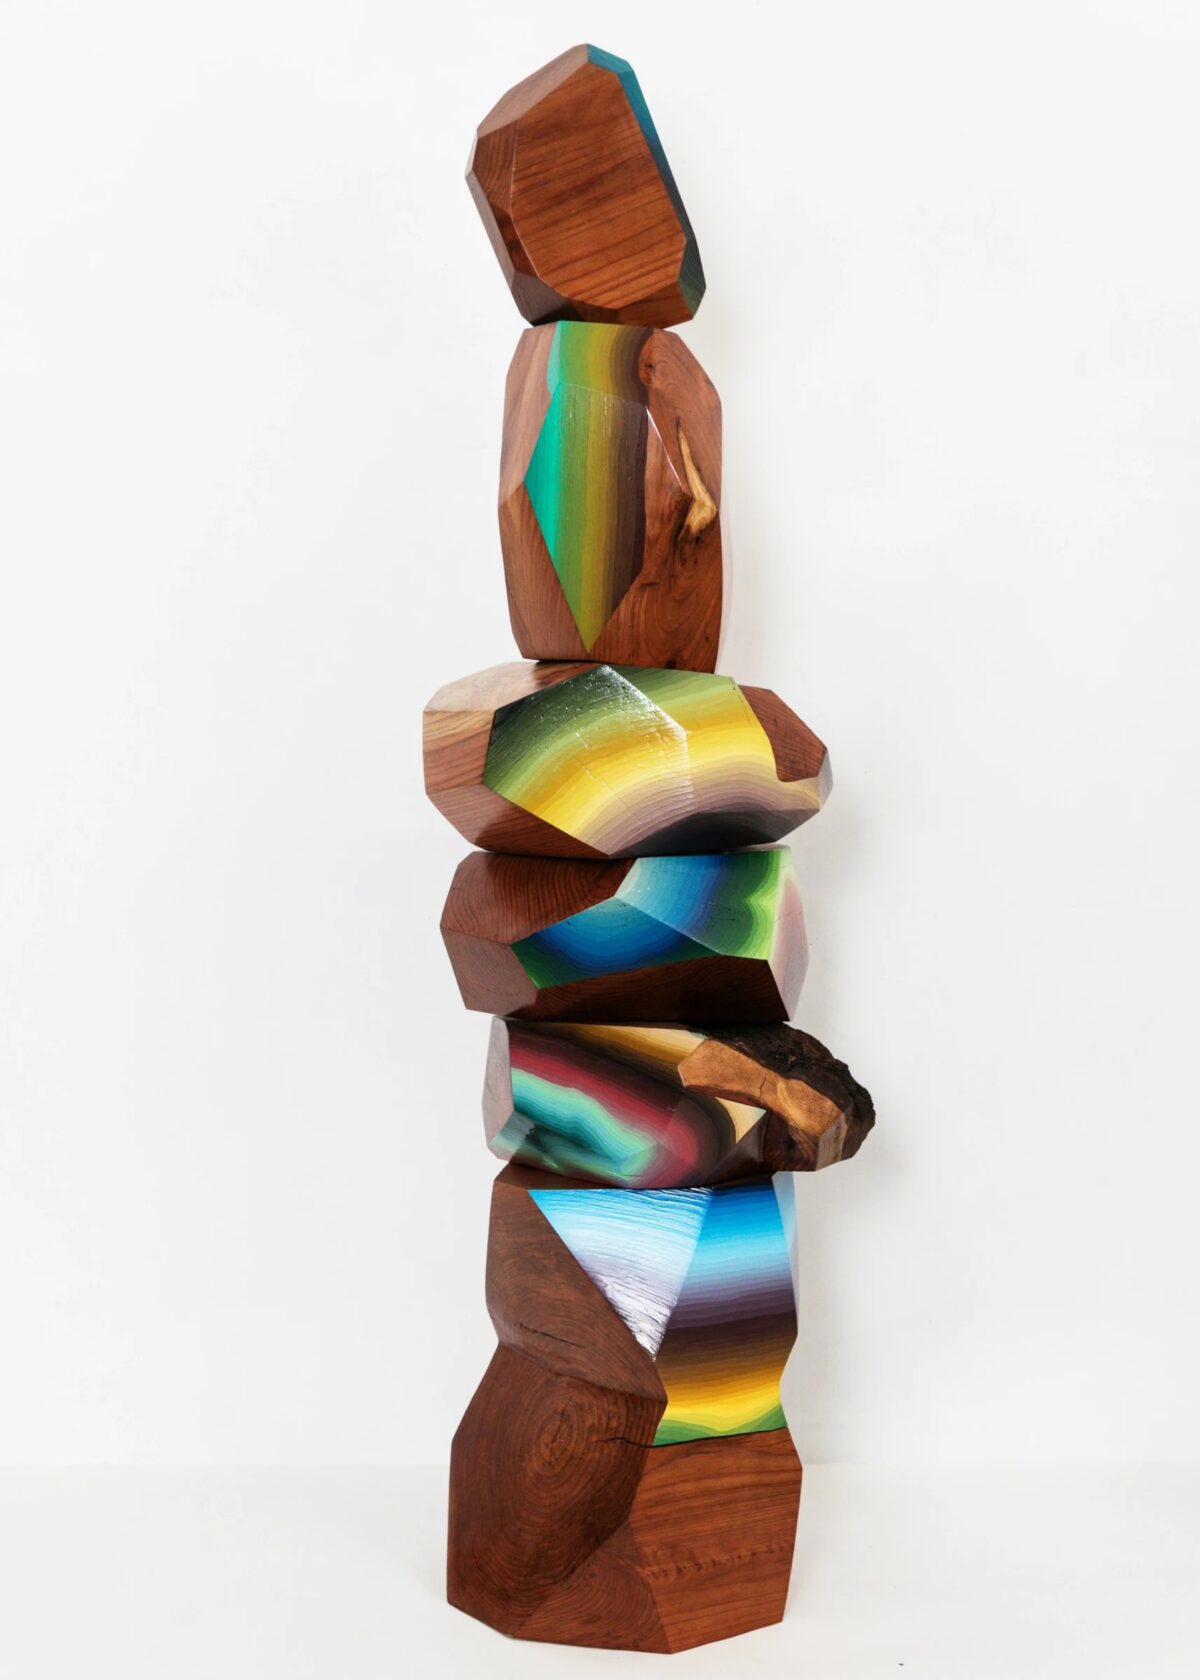 Wood Gemstones Colorful Abstract Sculptures By Victoria Wagner (2)